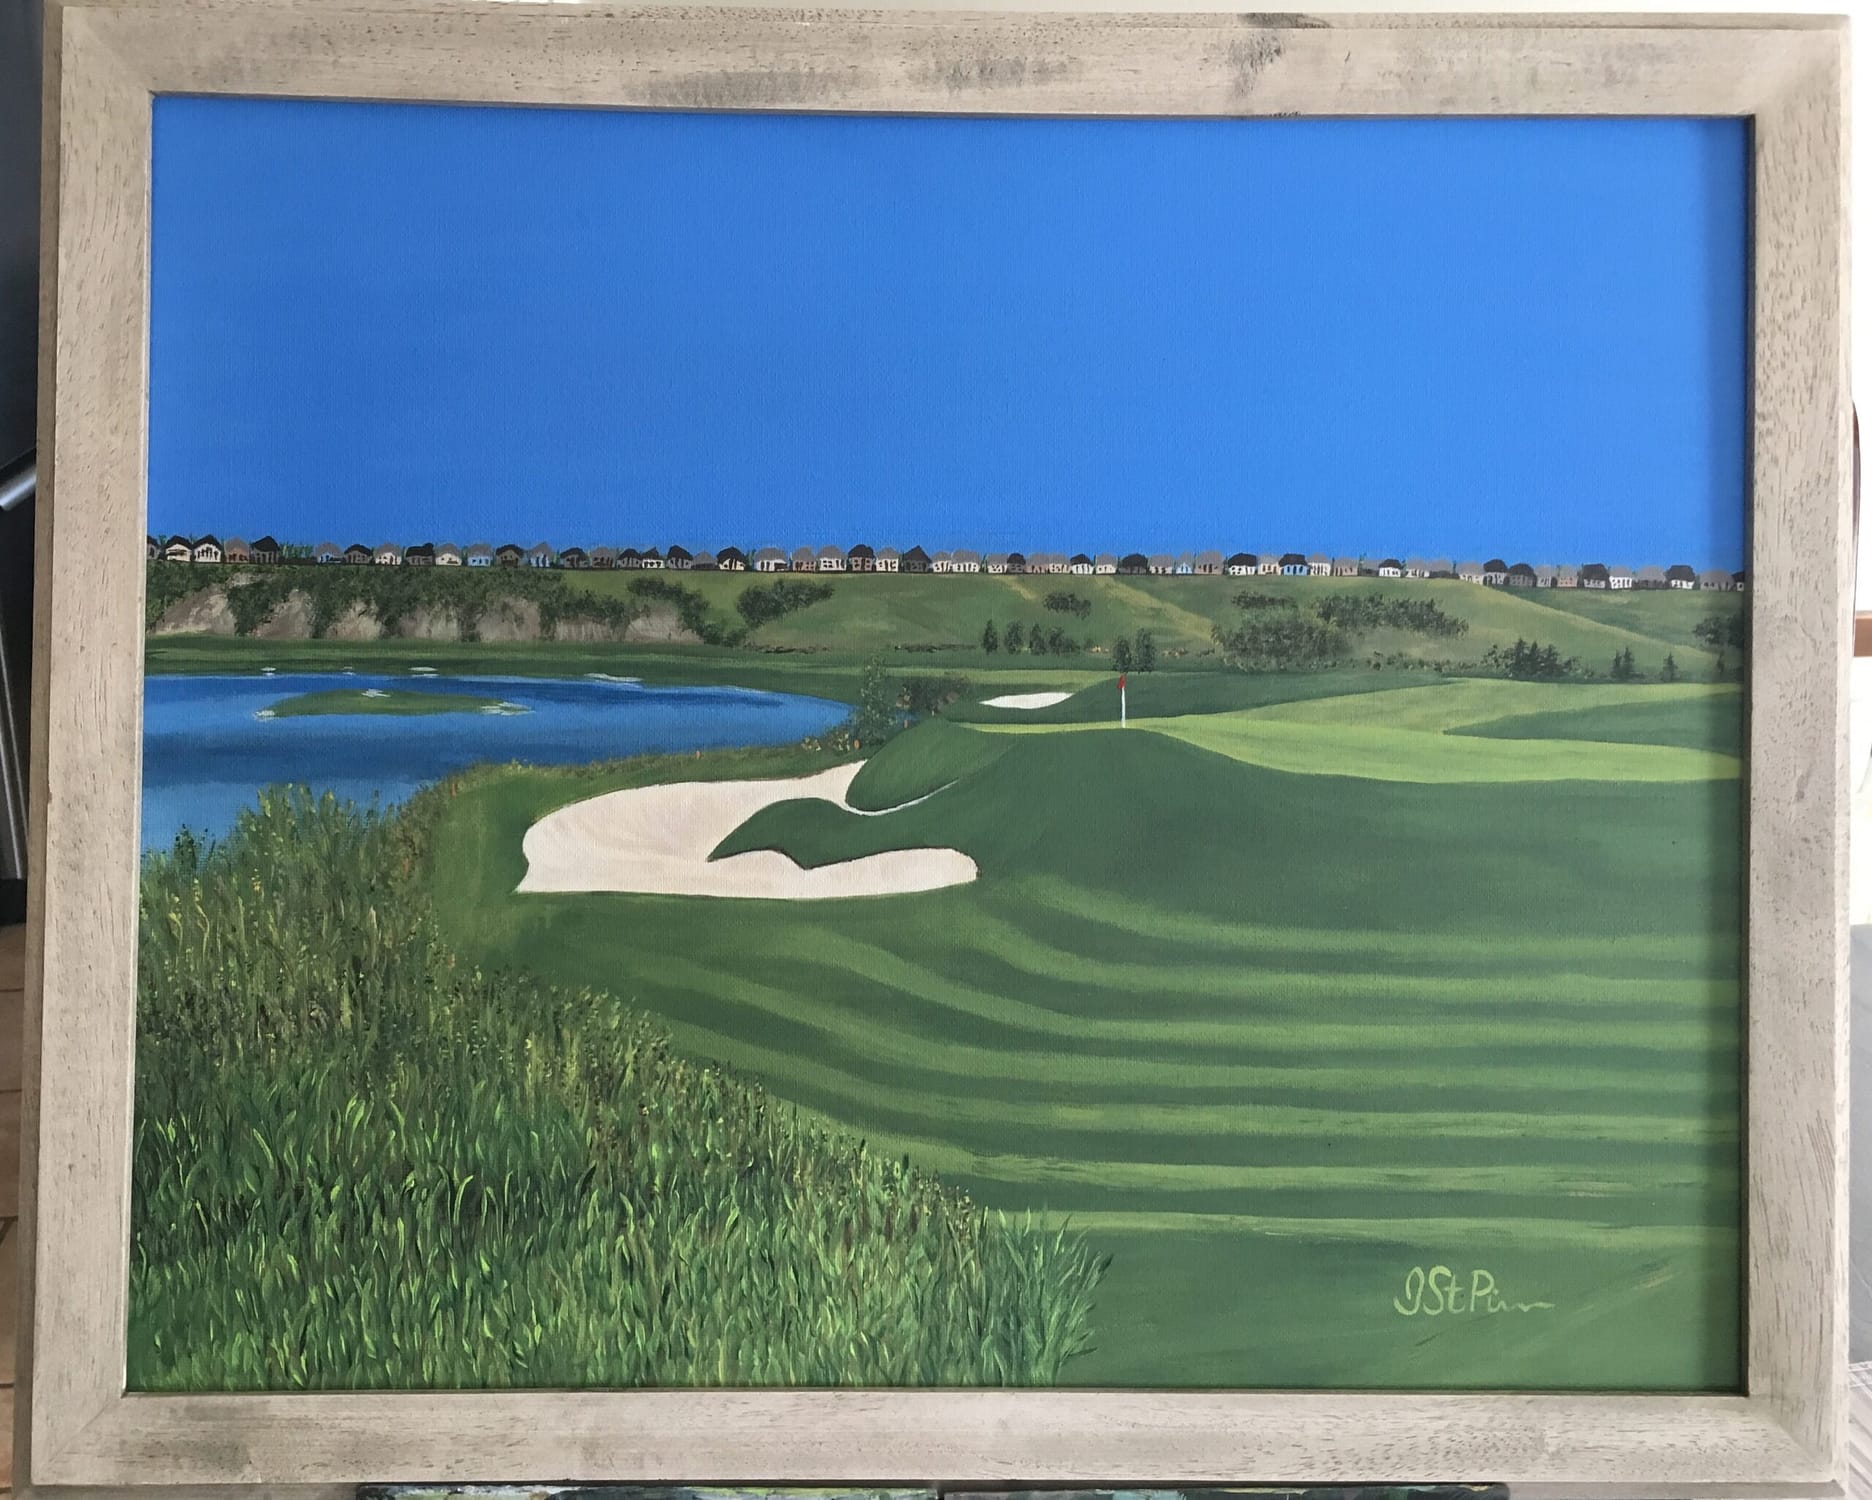 Painting of a golf course green and sand trap with pond in the background